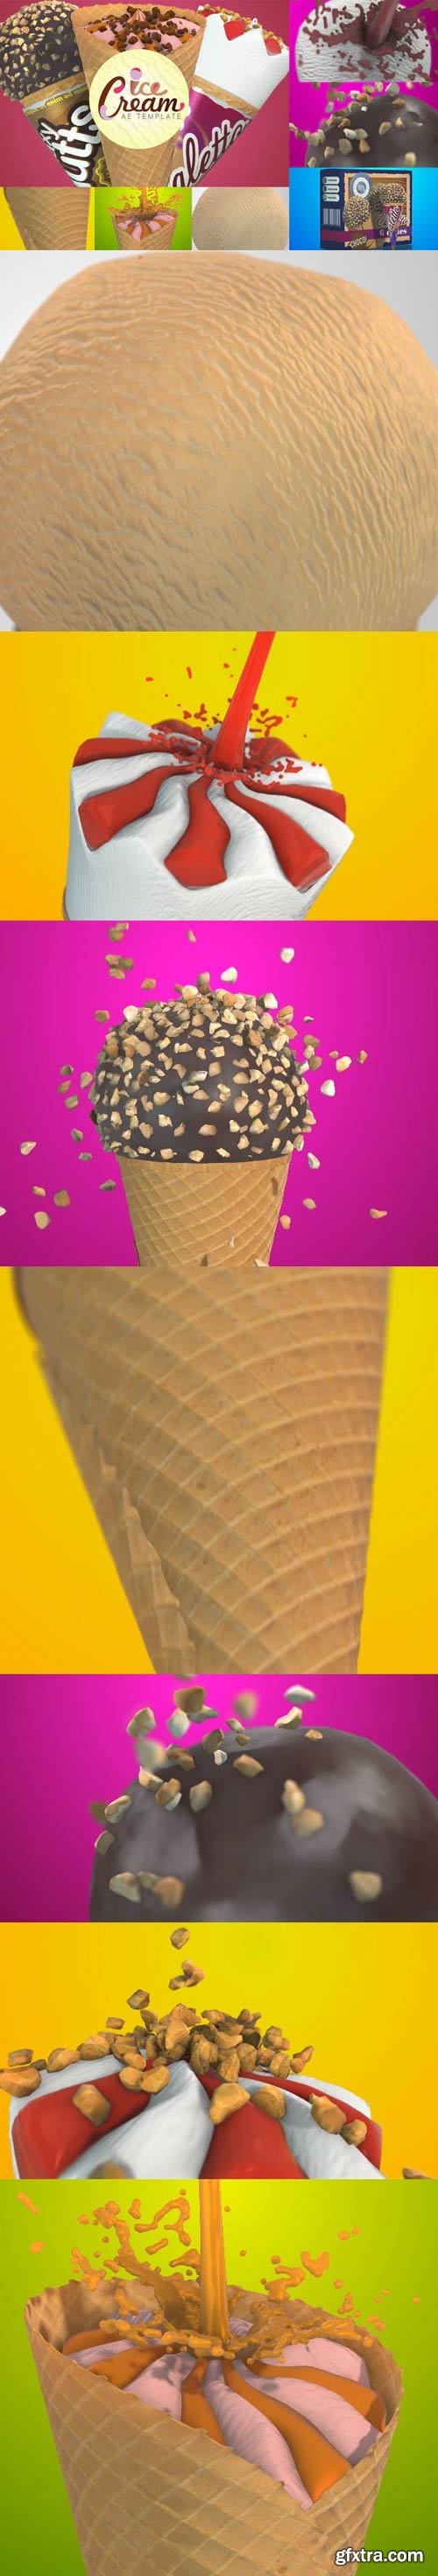 Videohive - Ice Cream Commercial - 23312083